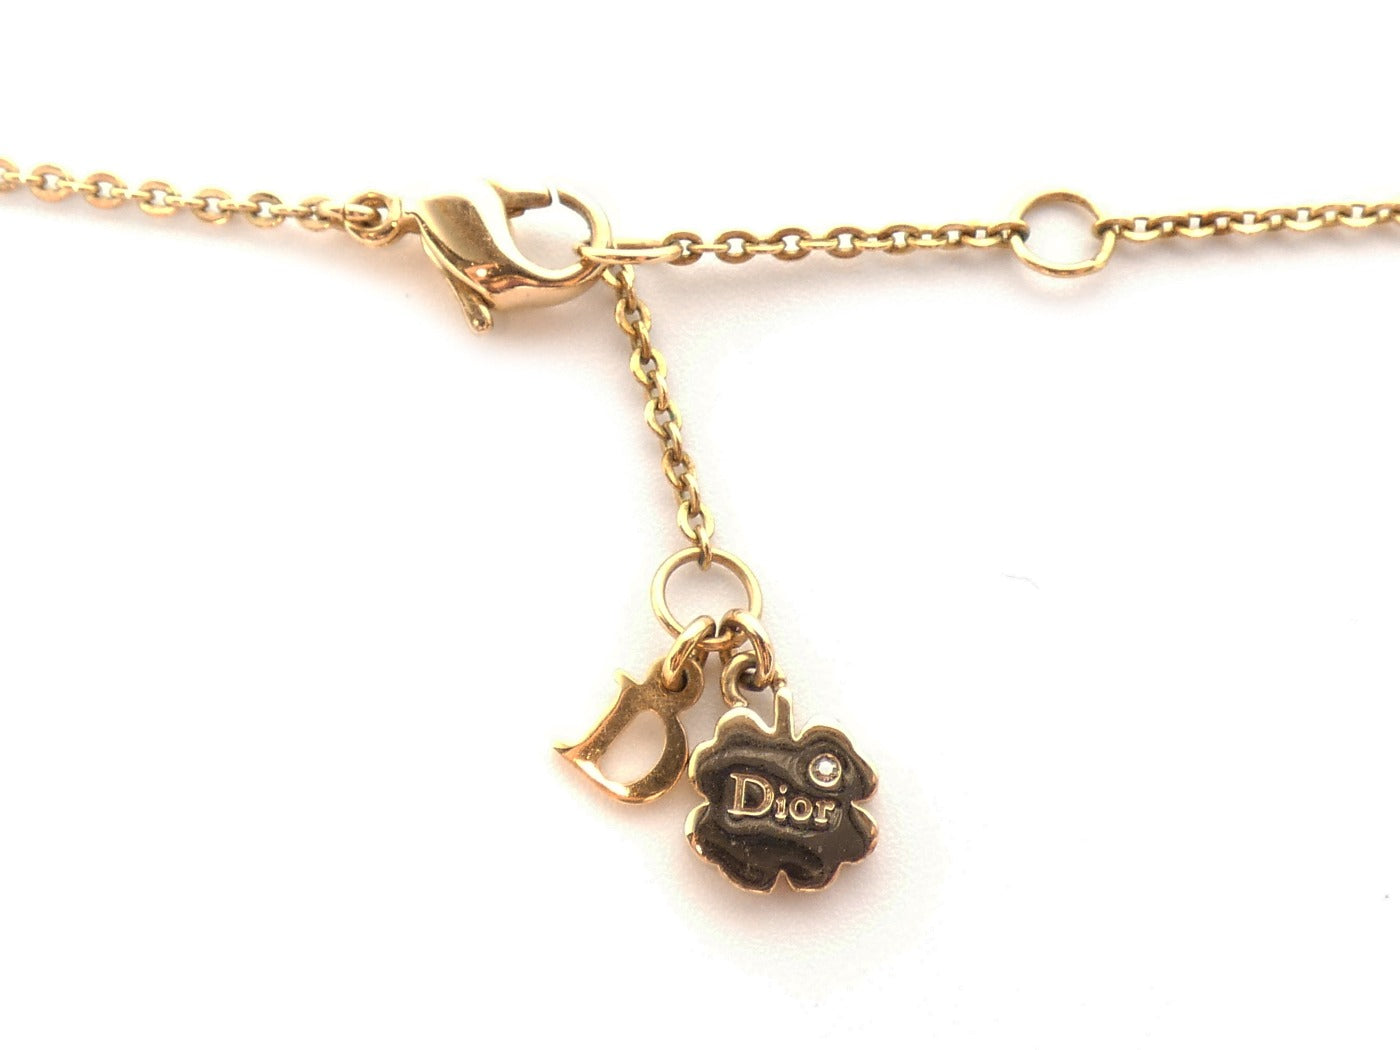 Authentic Christian Dior Black Charm Necklace Clover Heart GP